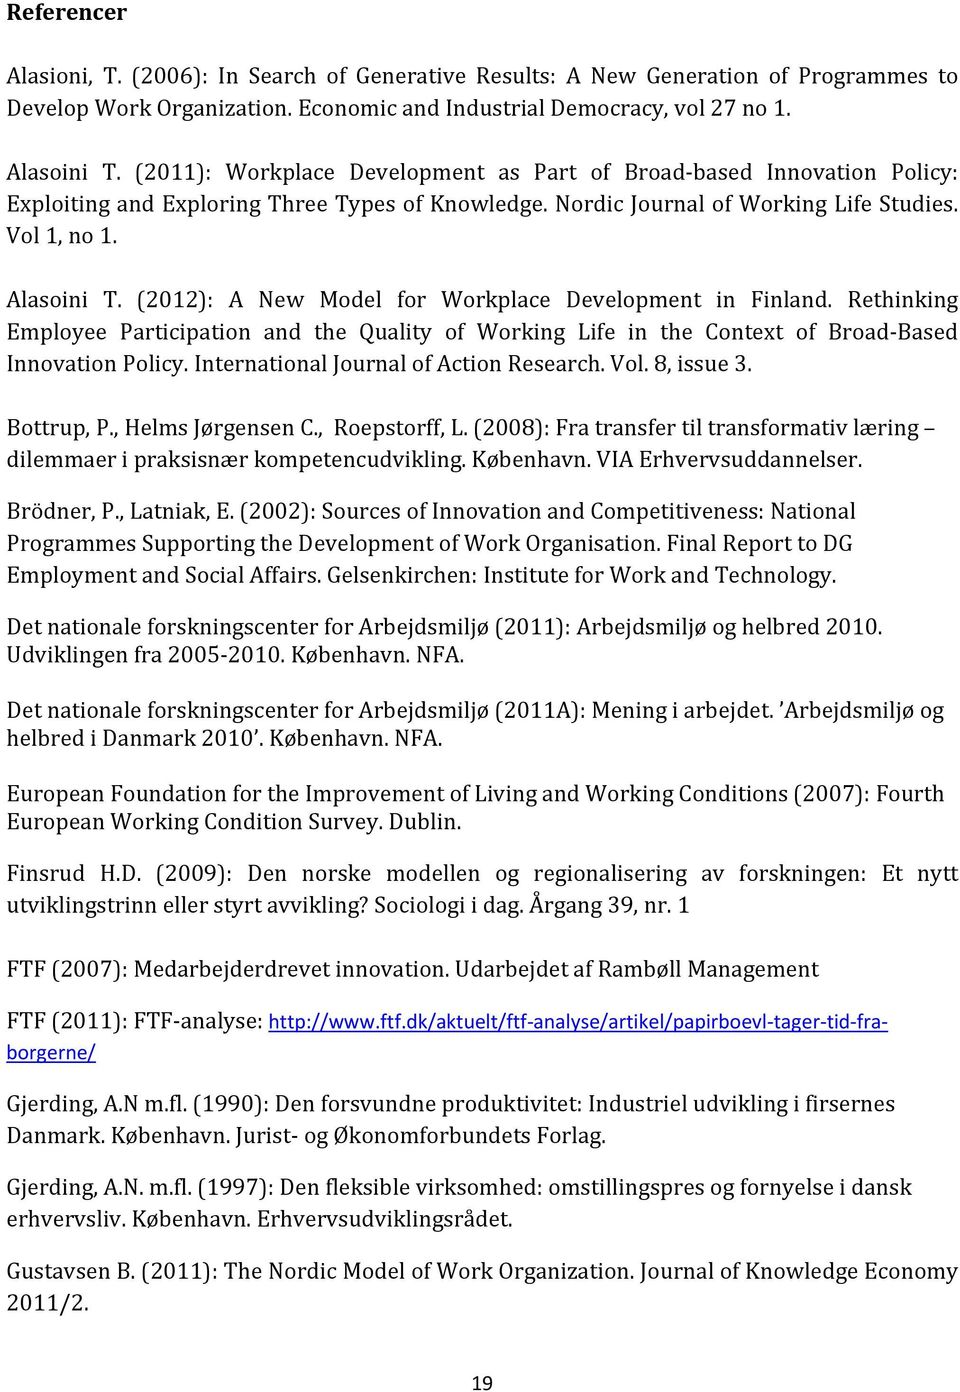 (2012): A New Model for Workplace Development in Finland. Rethinking Employee Participation and the Quality of Working Life in the Context of Broad Based Innovation Policy.